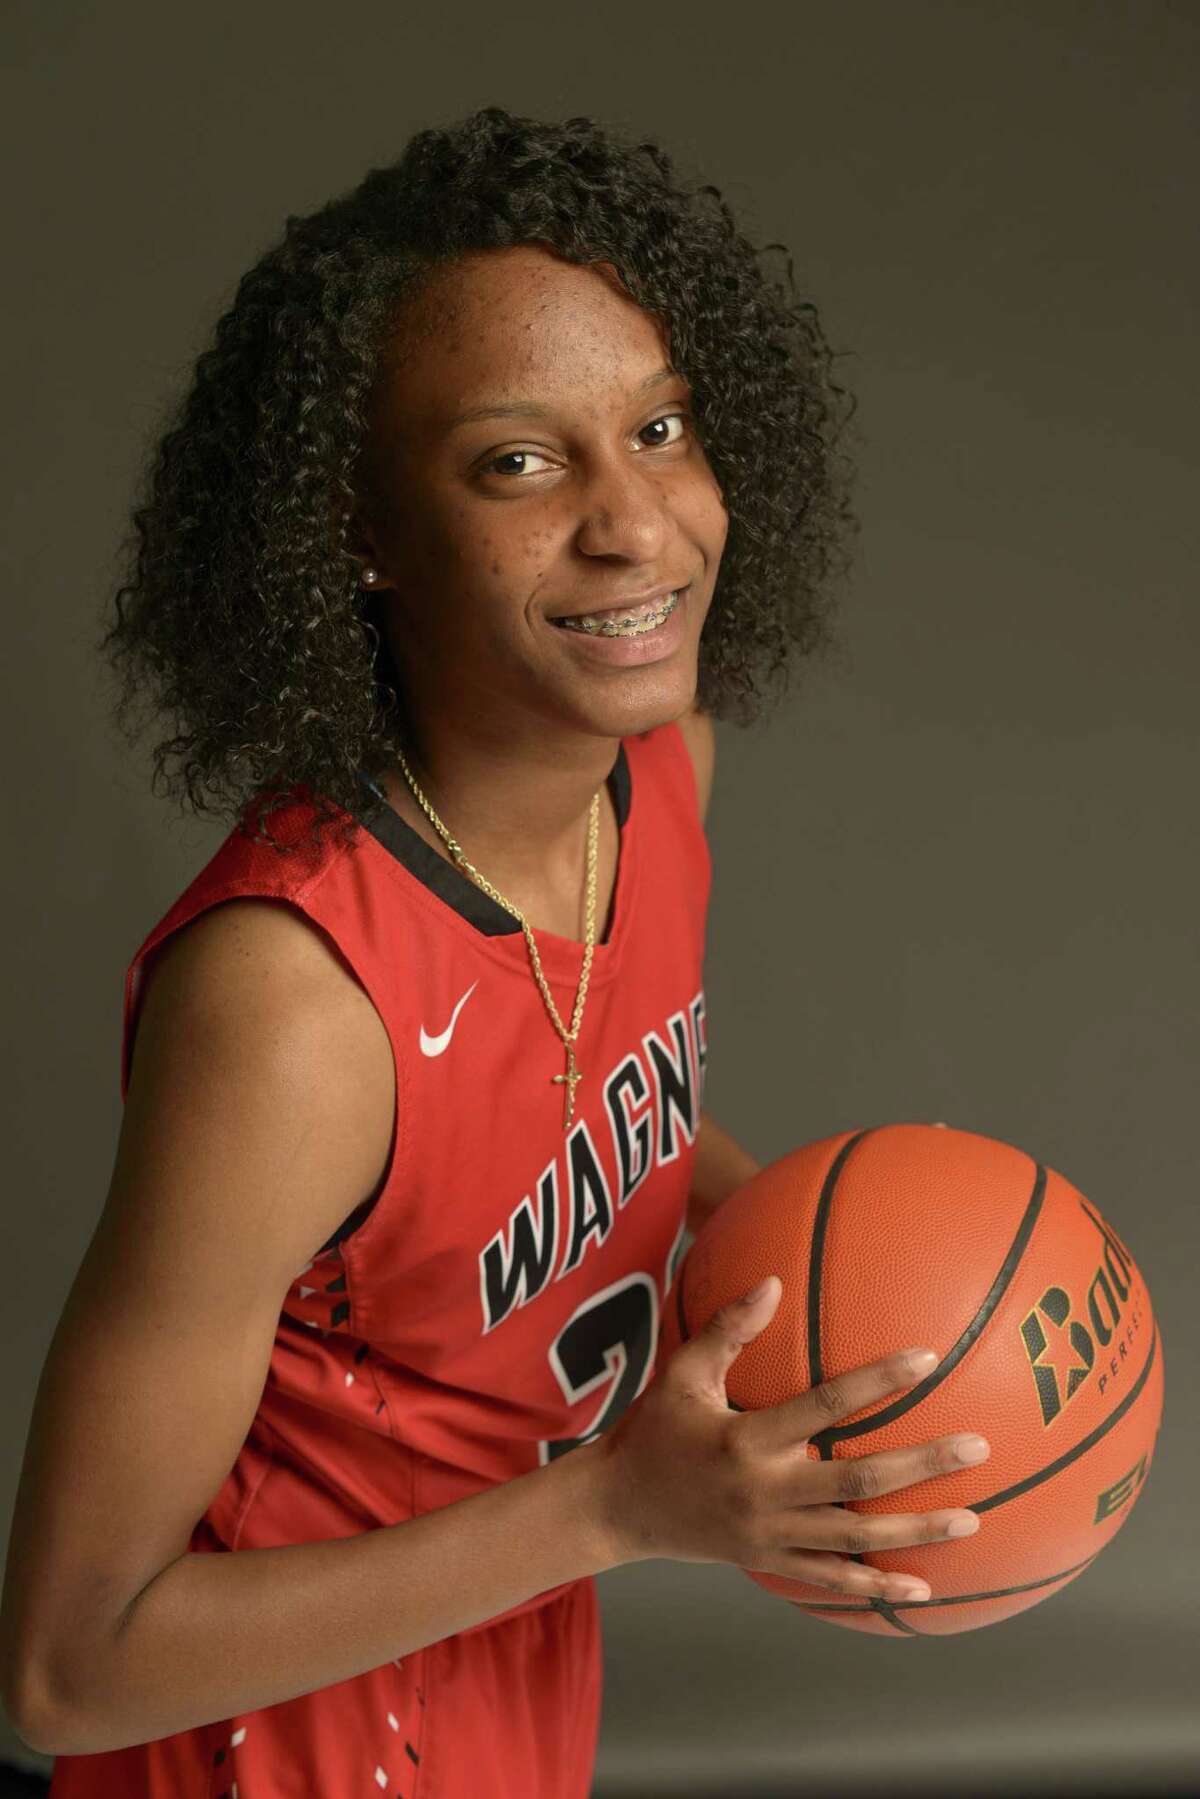 Kiana Williams of Wagner was named the 2016-17 Express-News girls basketball co-player of the year.